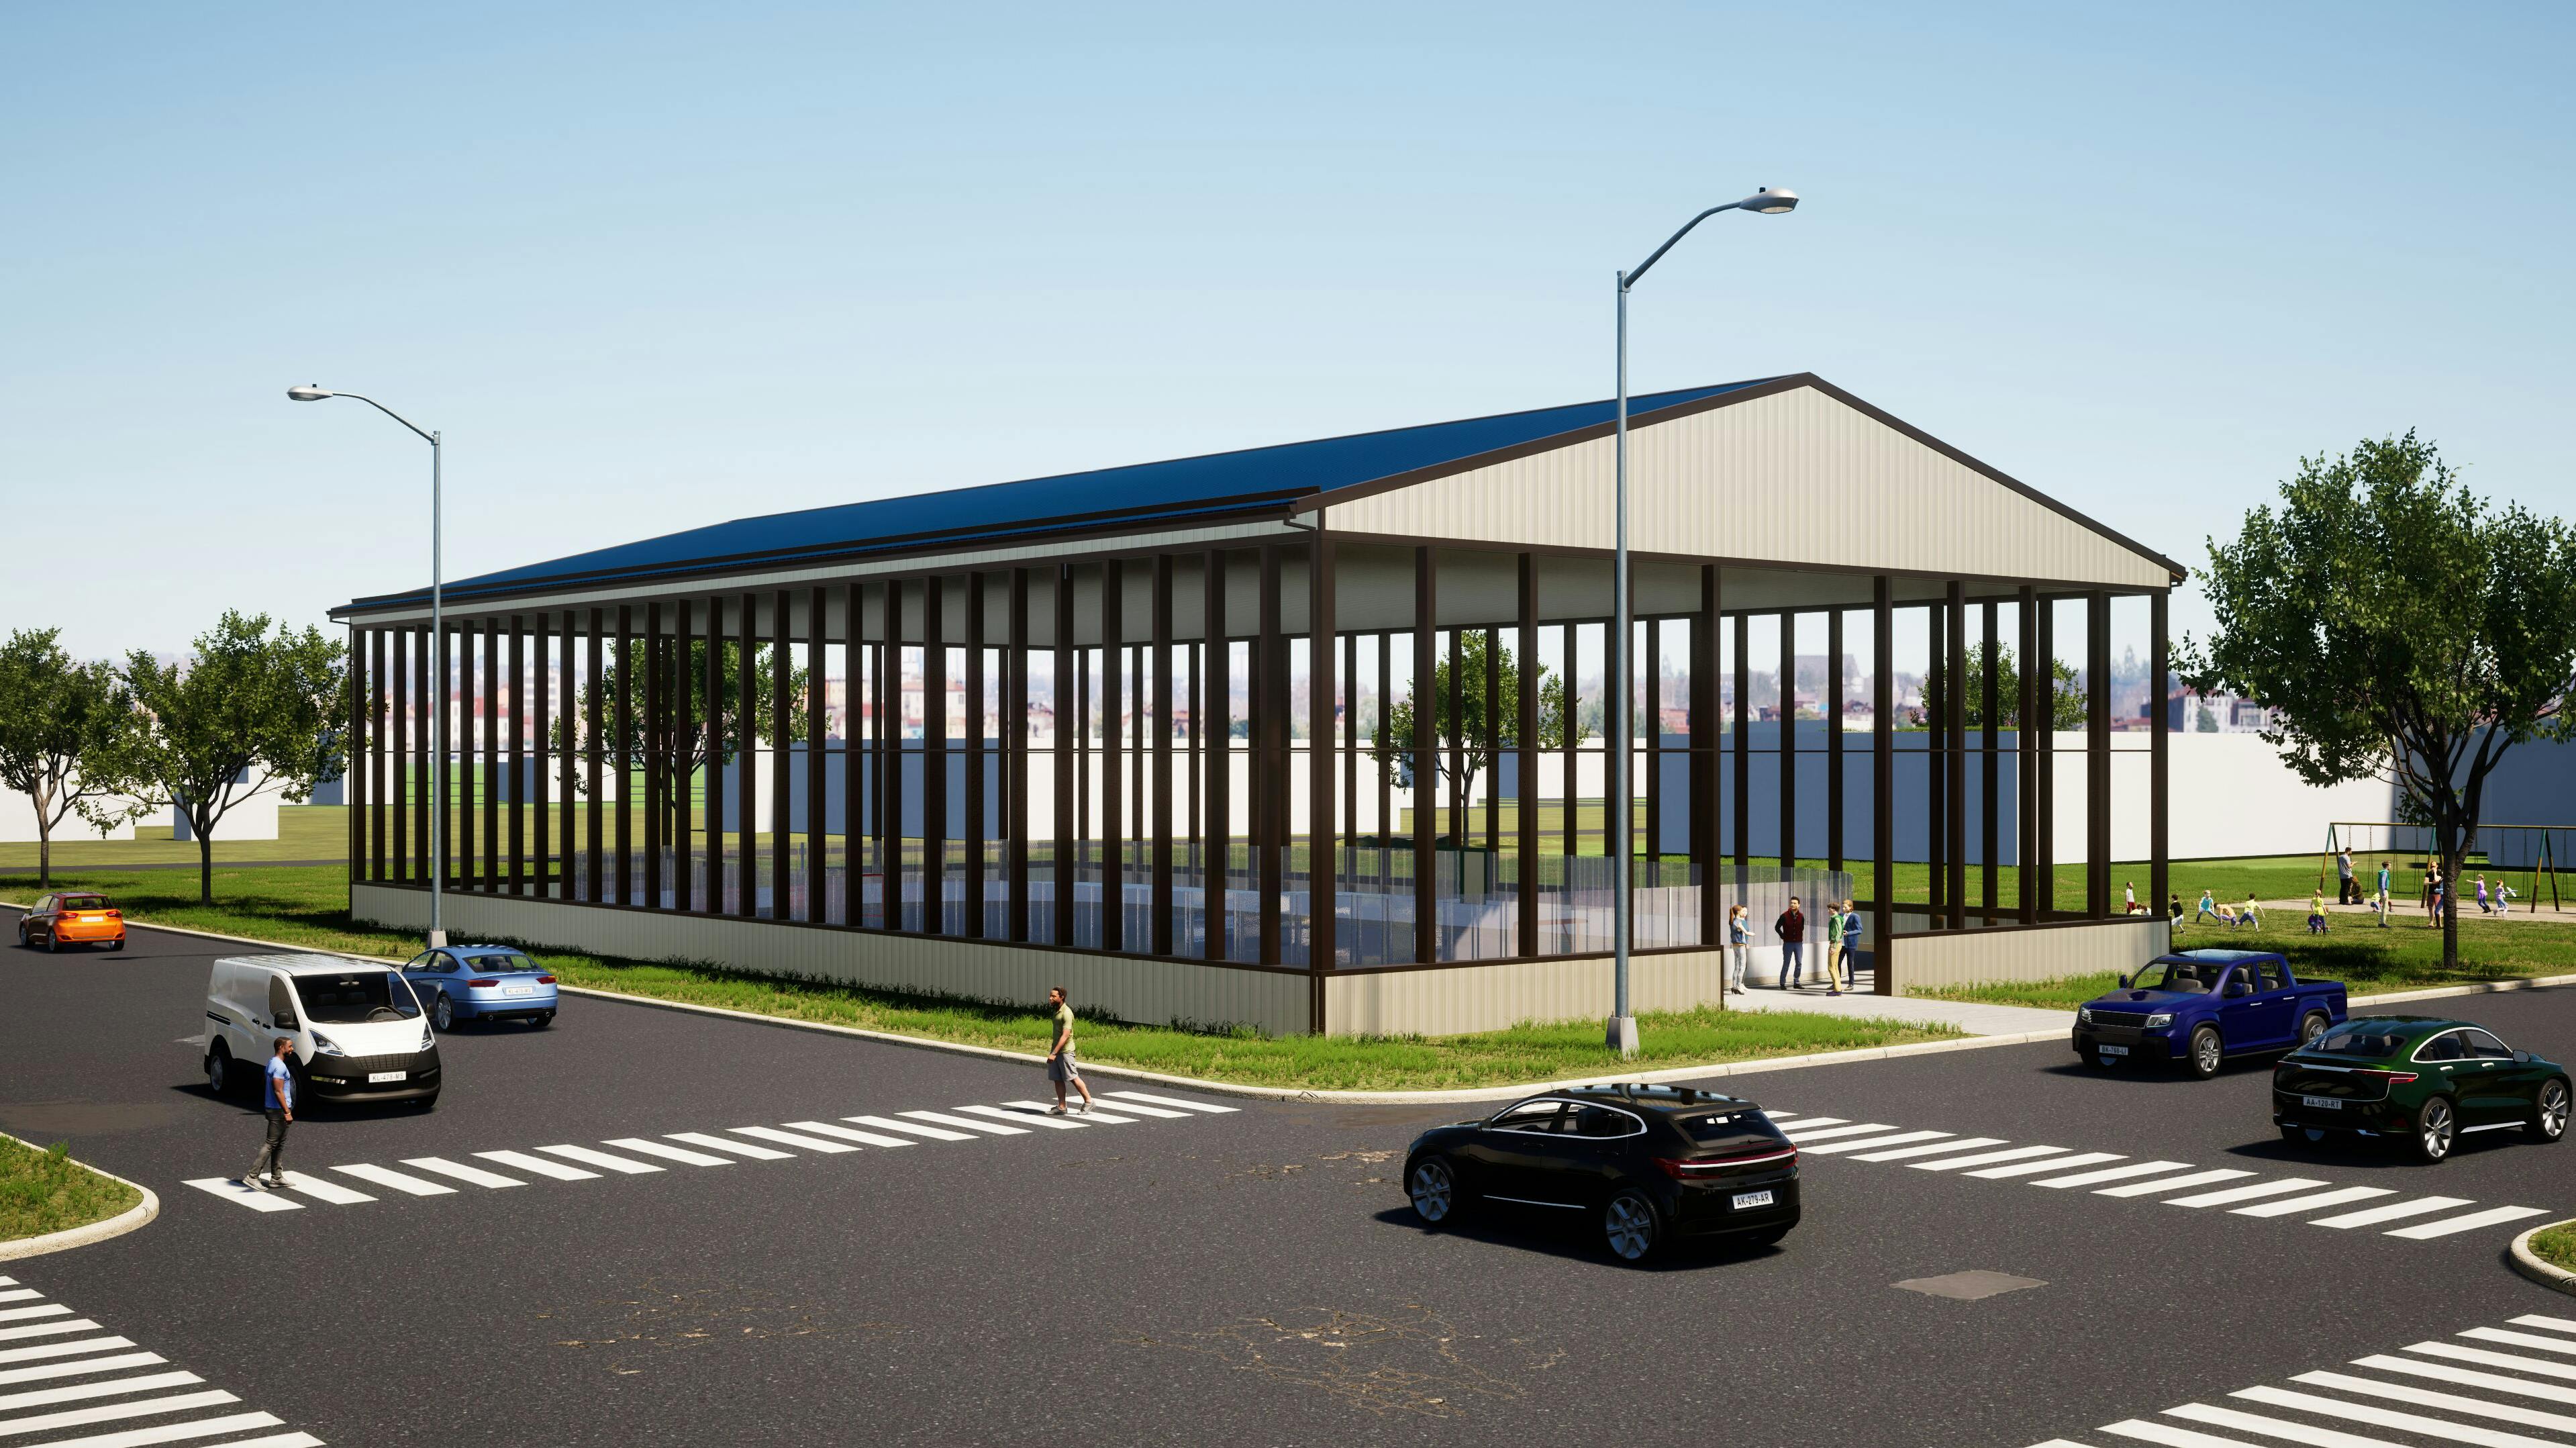 Swanavon Covered Rink - Concept Image.bmp